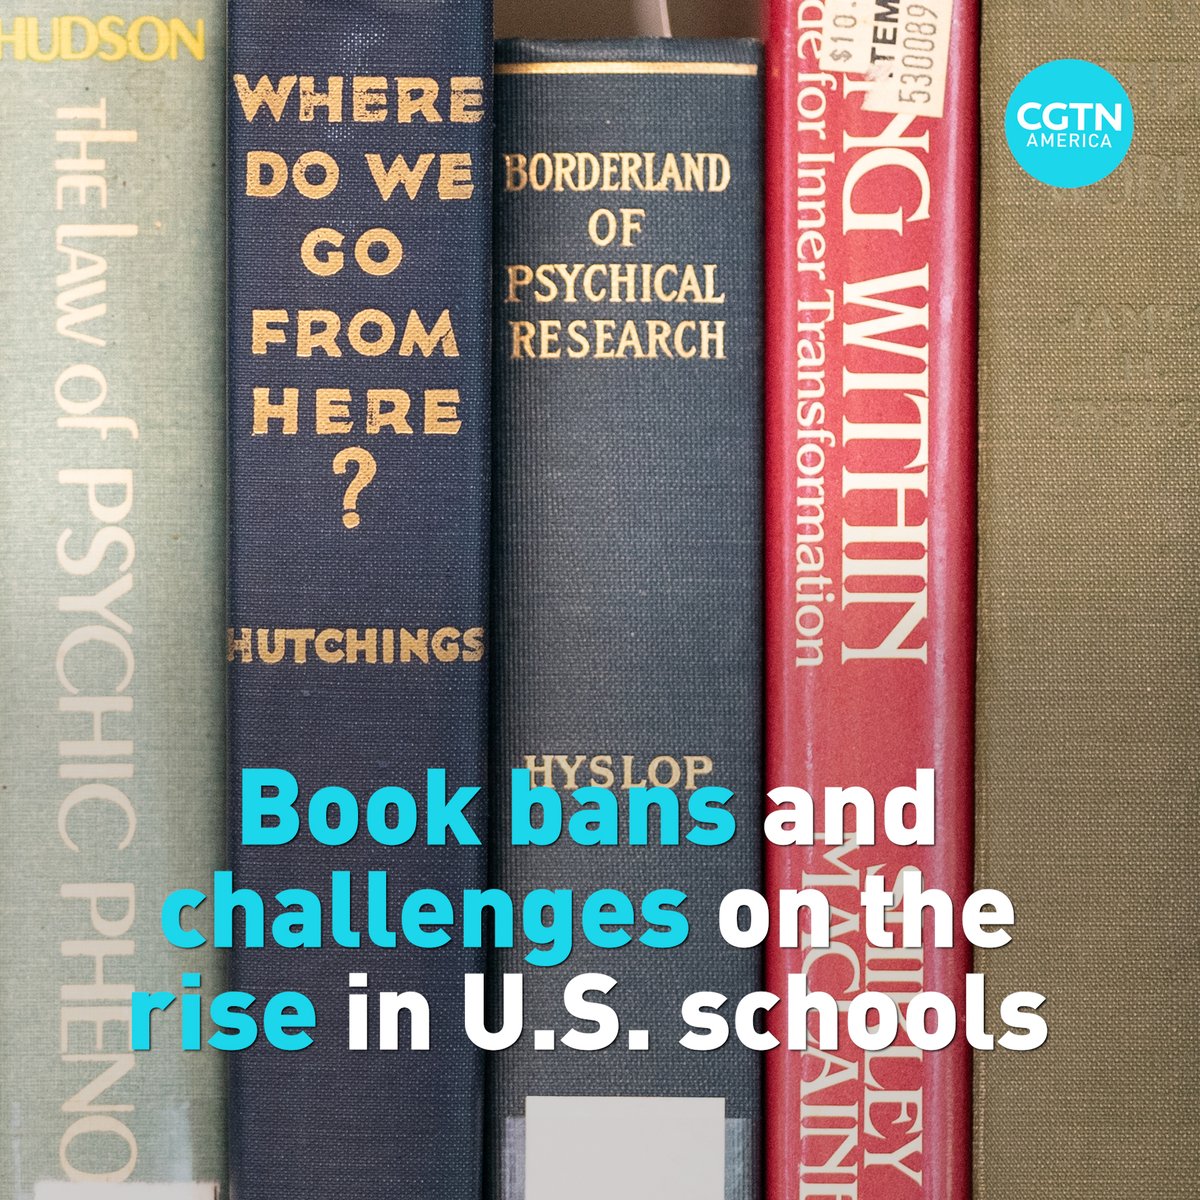 The Hate U Give. Gender Queer. The Bluest Eye. This Book is Gay.

Those are some of the most challenged books of 2021, as attempts to ban books from school libraries across the U.S. reached historic heights last year. https://t.co/id08CbQbLM